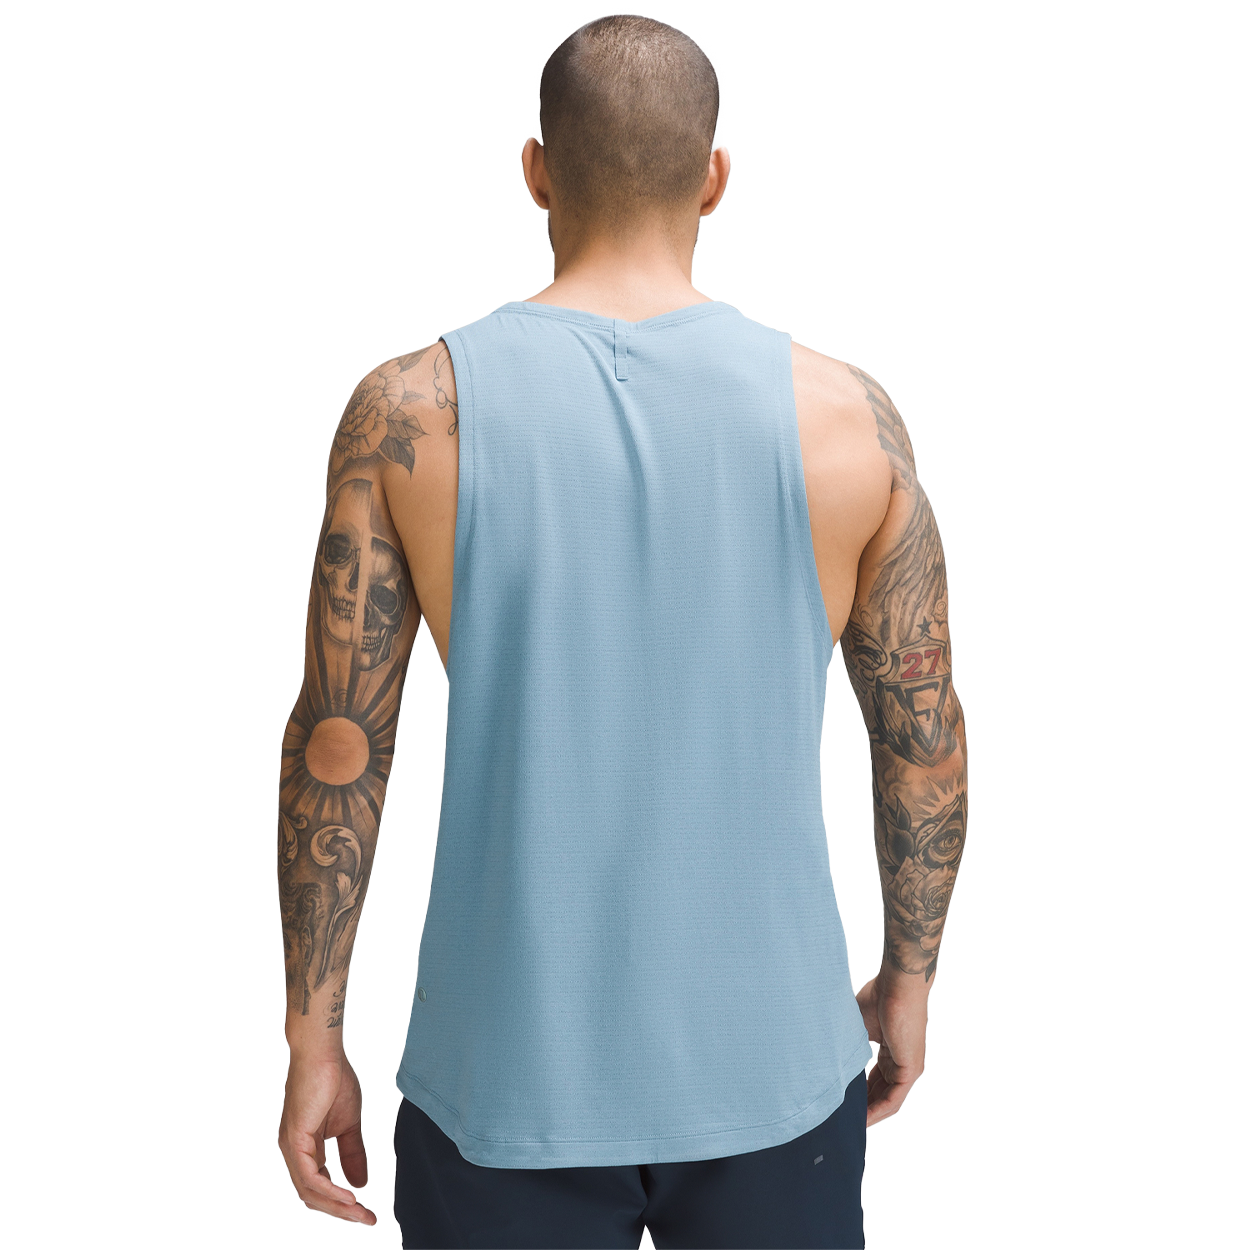 BAUER // Lululemon LICENCE TO TRAIN TANK, 43% OFF